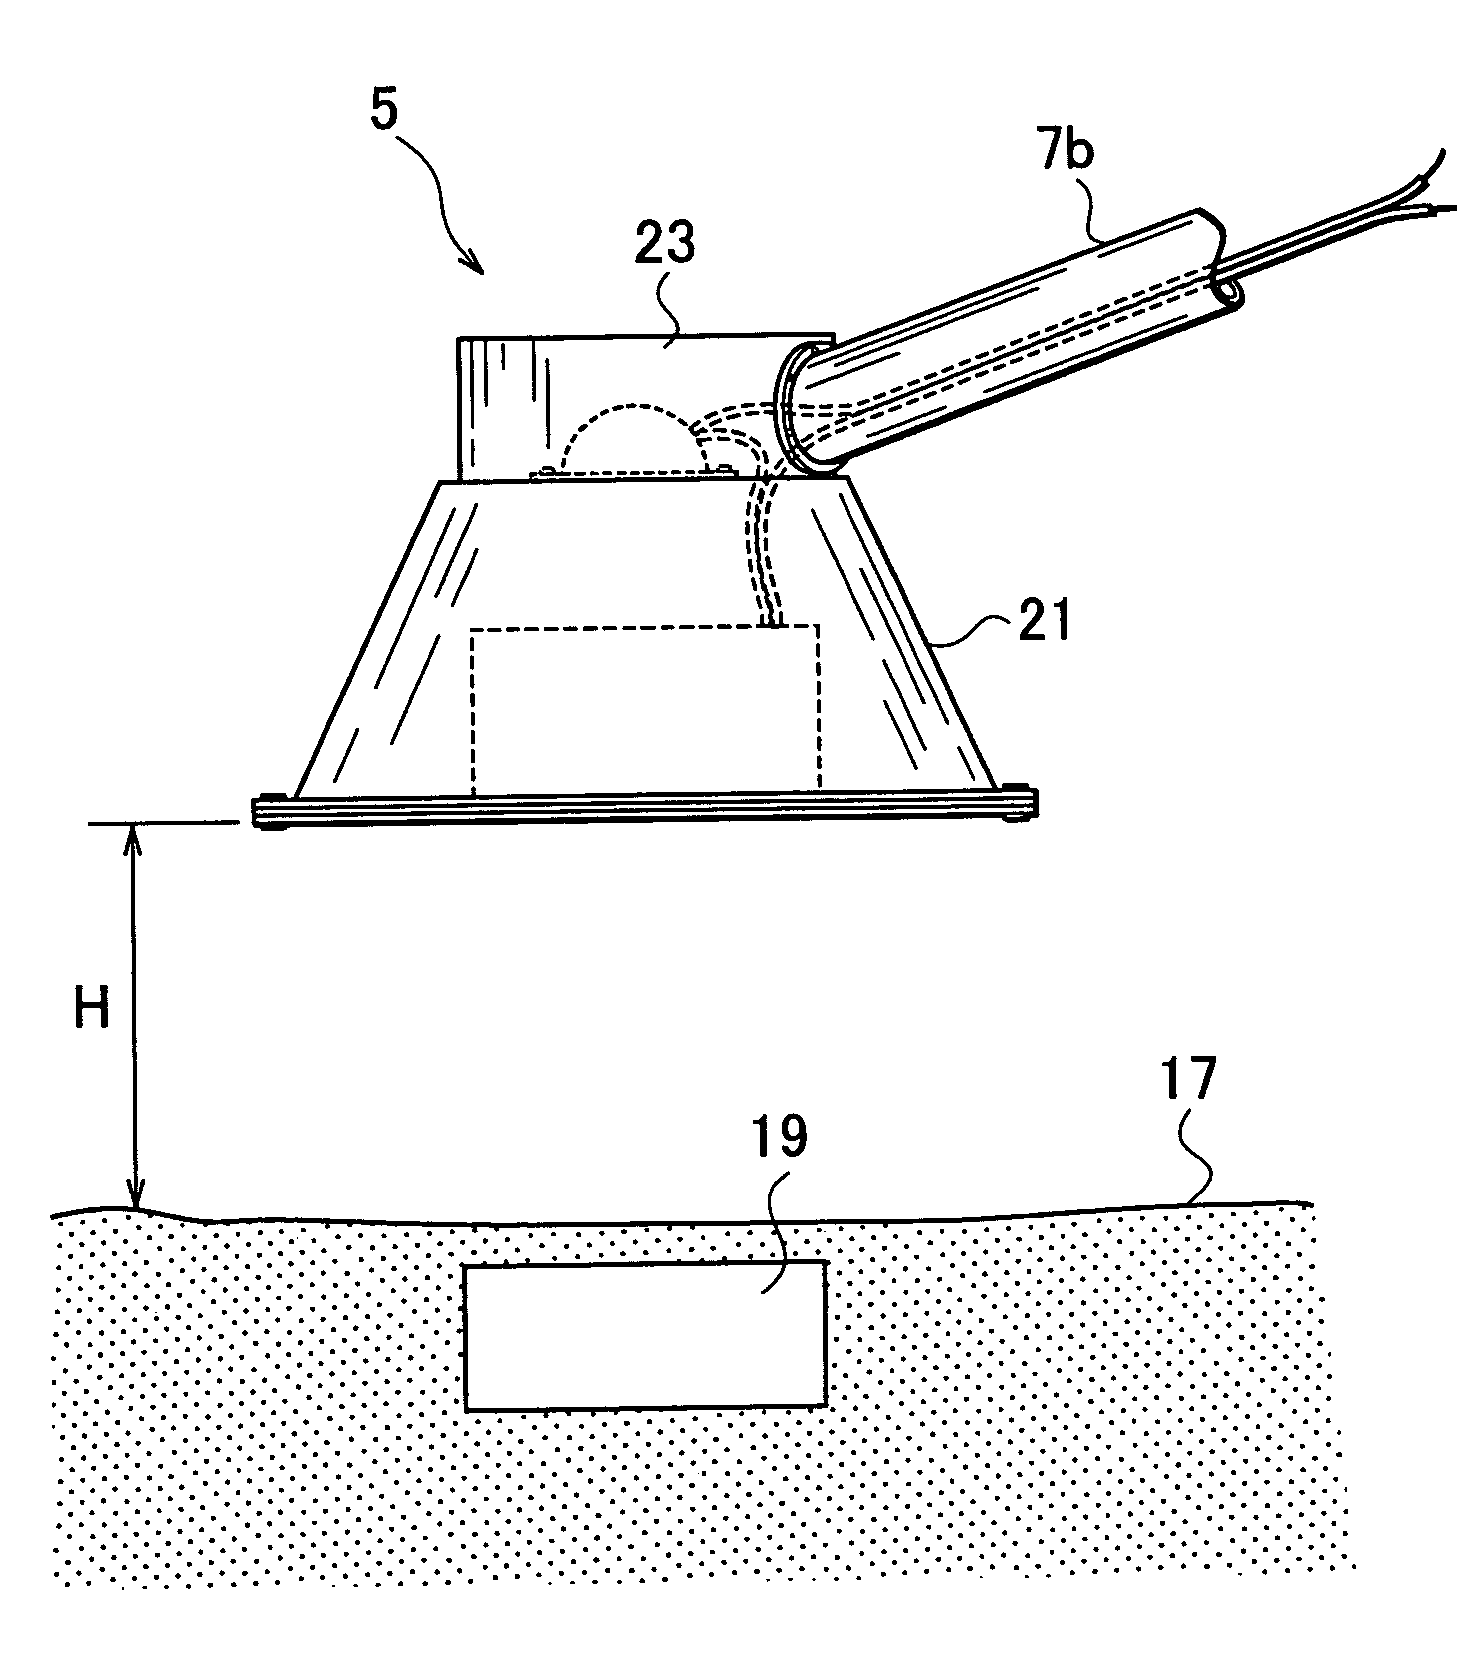 Buried structure detection device